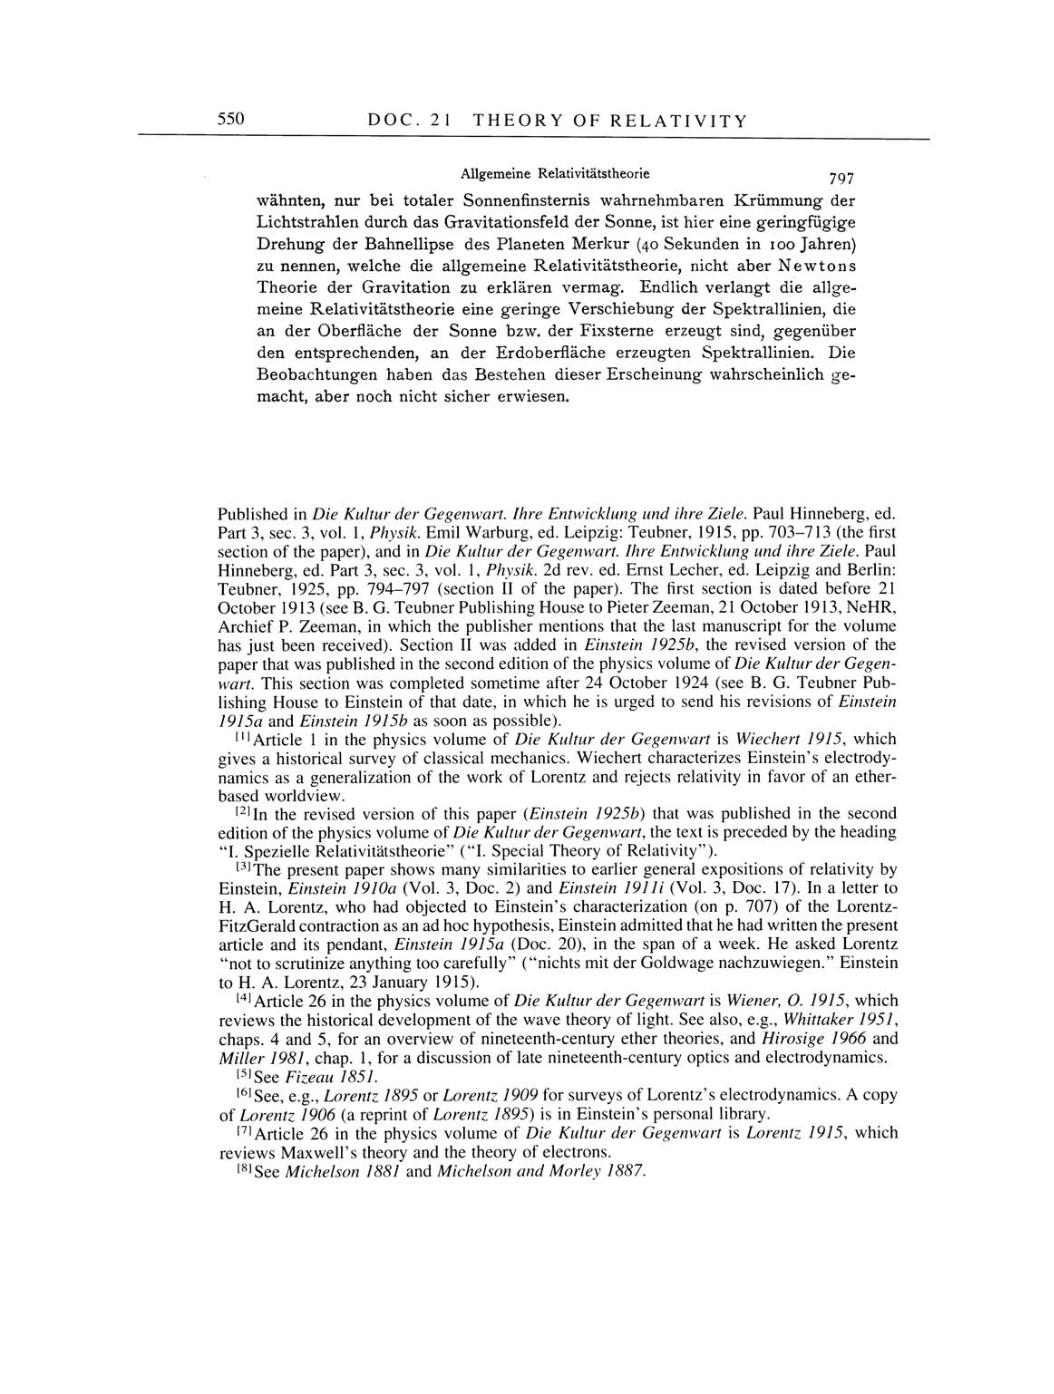 Volume 4: The Swiss Years: Writings 1912-1914 page 550